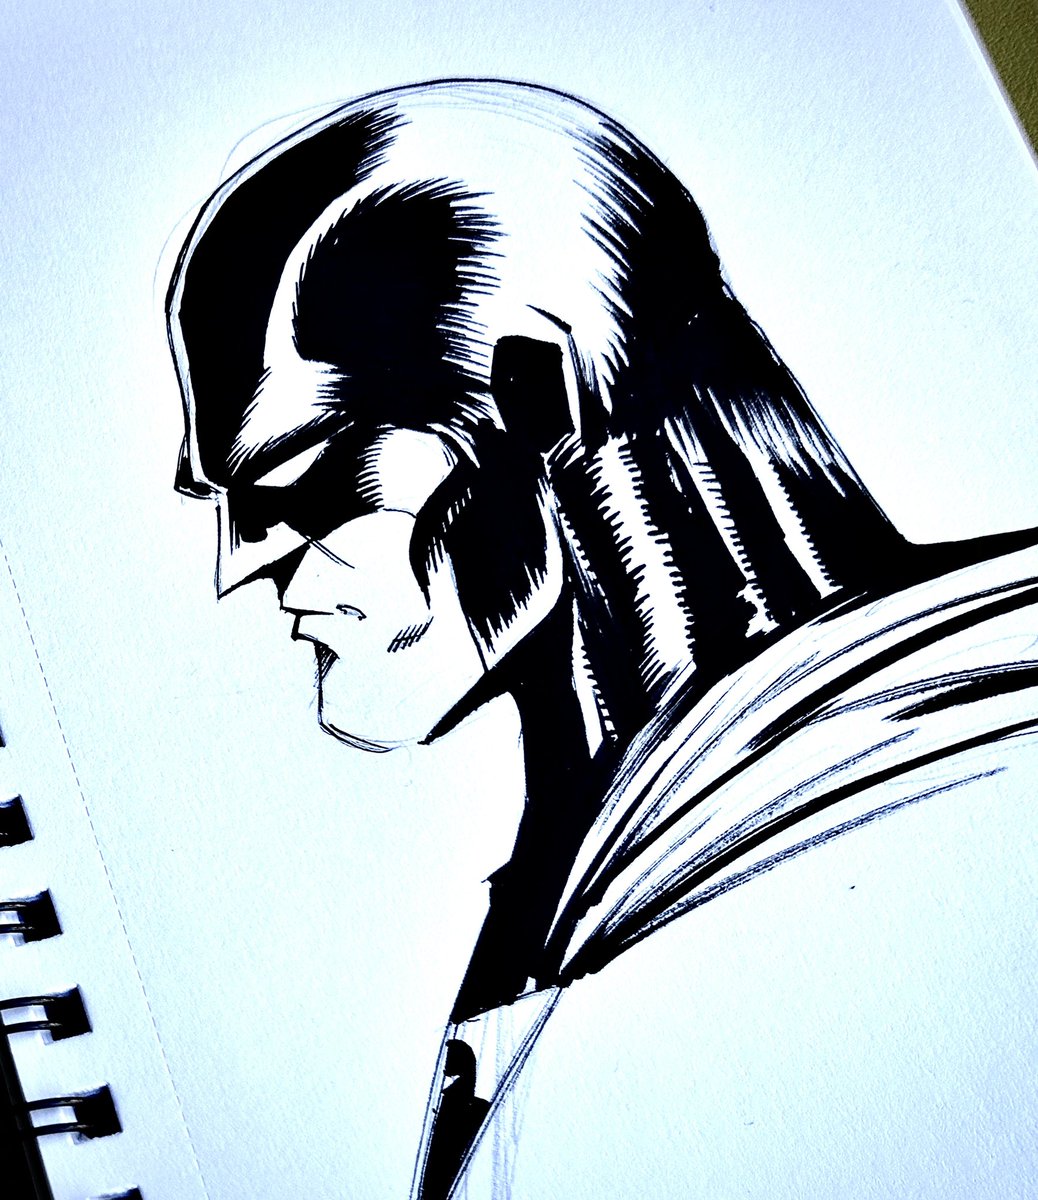 Quick Space Ghost sketch at work for a warm up.  Where my coast to coast peeps at - #SpaceGhost #30thAnniversary